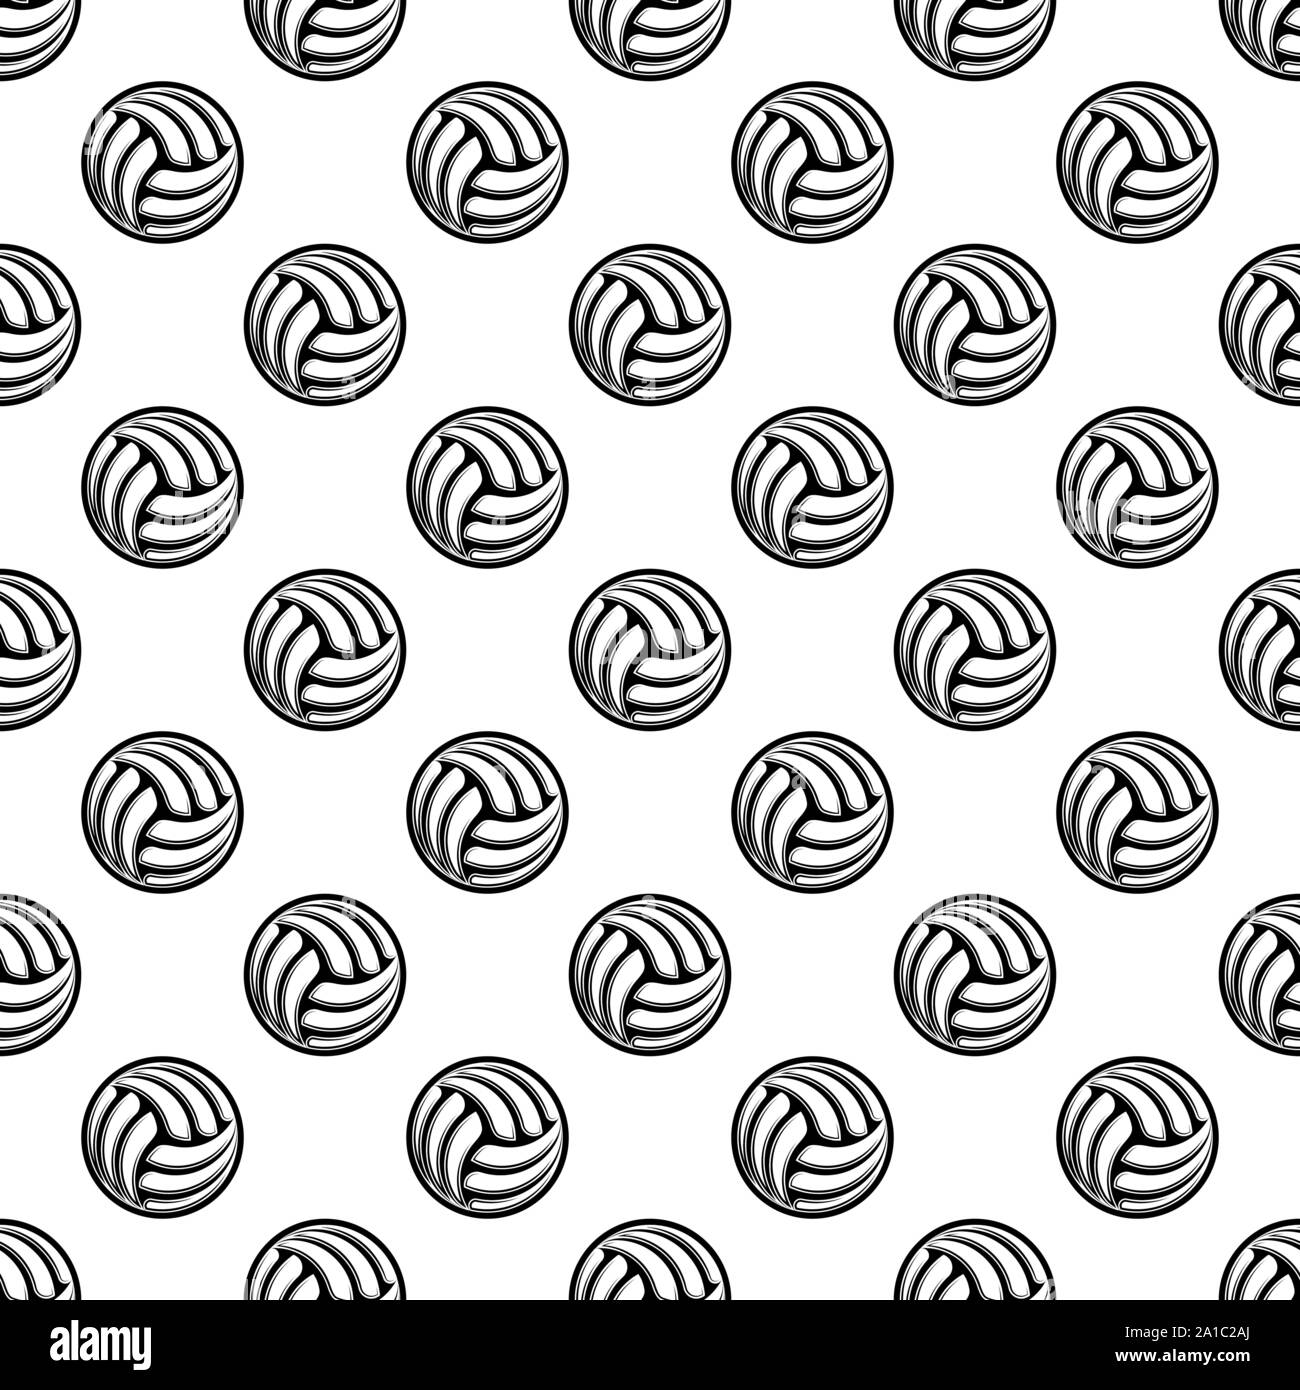 White background with black outline volleyball seamless pattern Stock ...